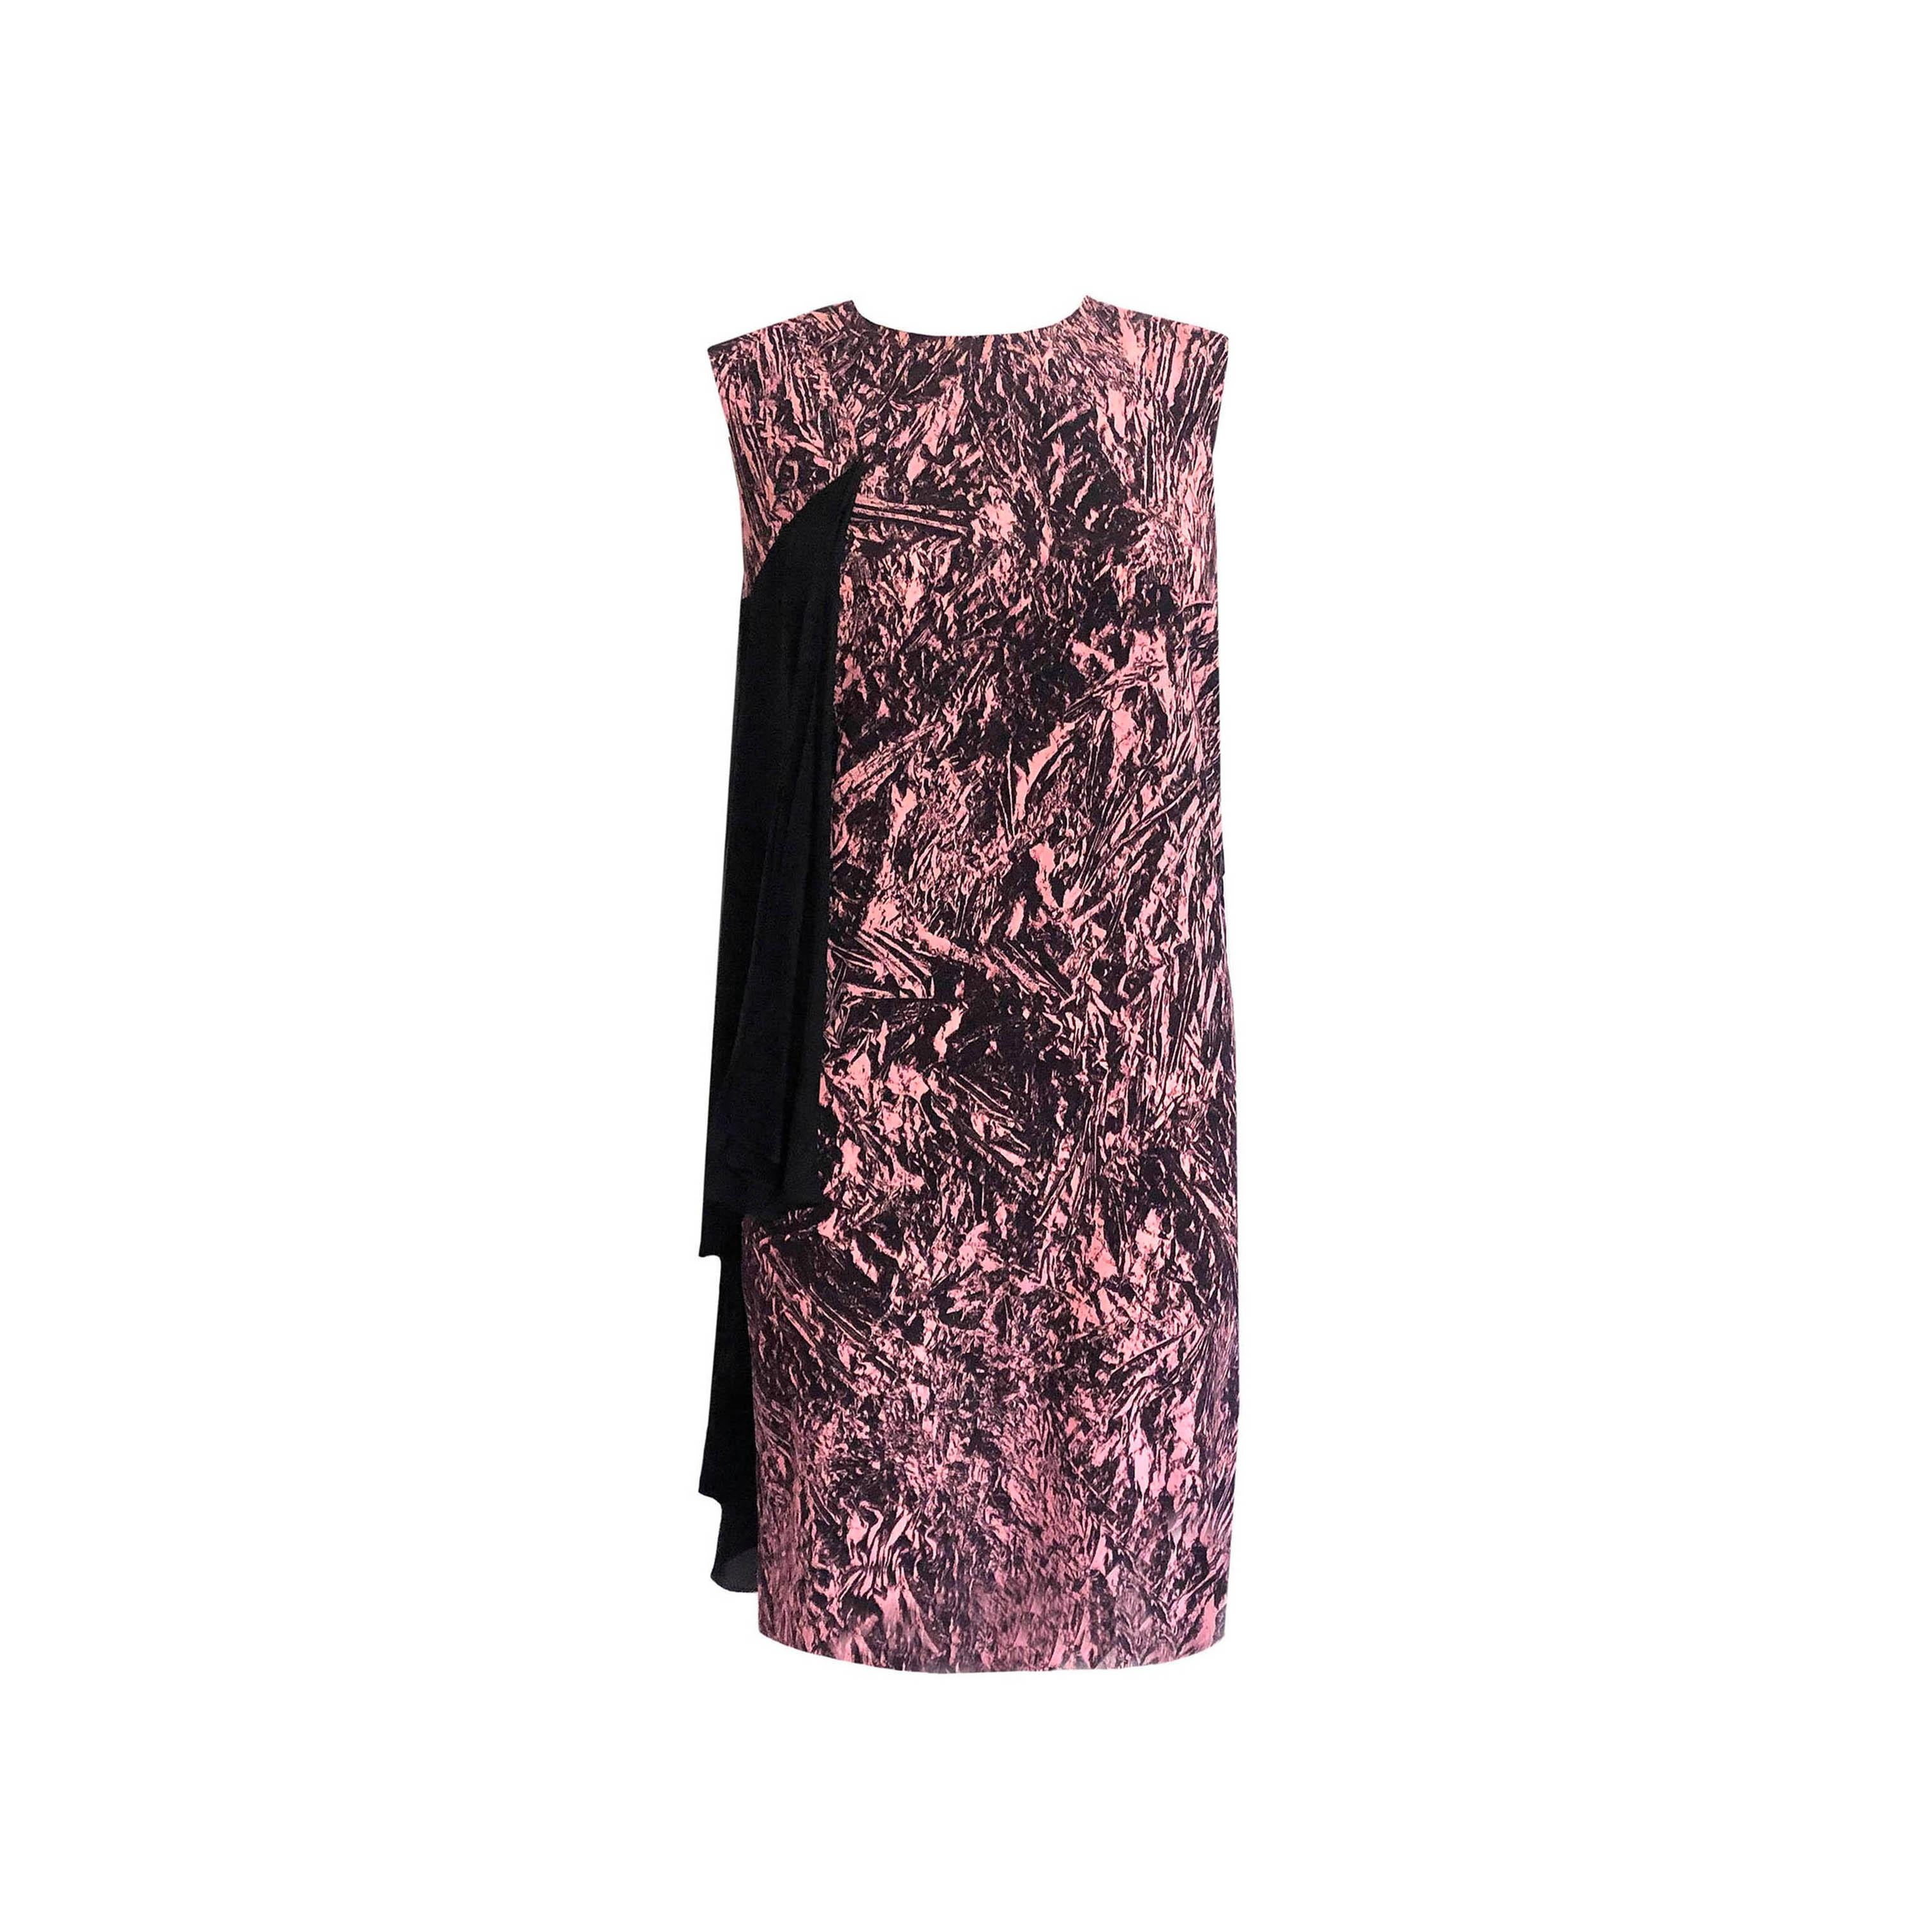 Product Details: Alexander McQueen - Silk Shift Dress - Pink + Black Abstract Print - Draped Cascading Side Panel + Tie-Back Detail - Side Zip Fasten
Label: McQ Alexander McQueen
Size: IT 38 / UK 10 (Fits UK 8 to UK 12)
Fabric Content: Pink + Black